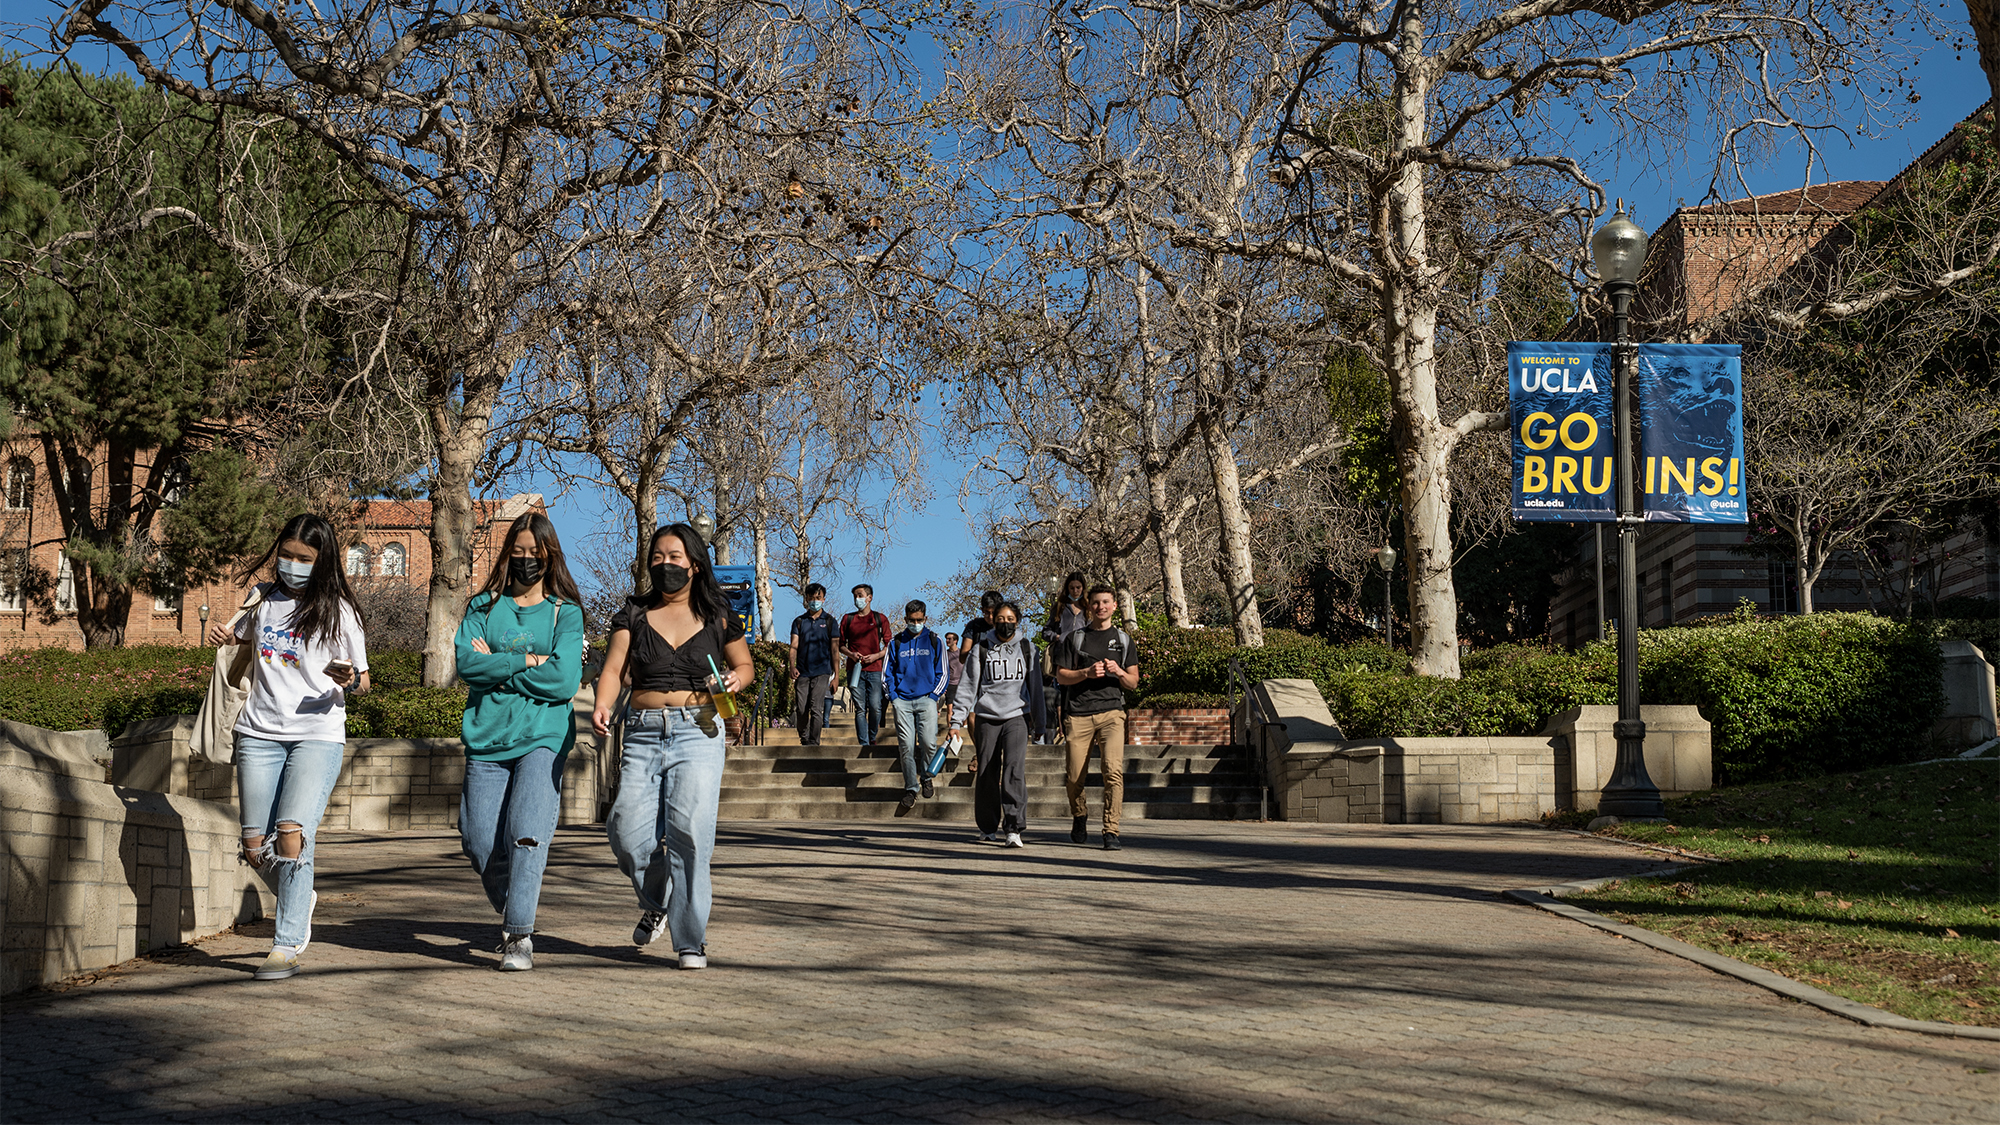 Students walk on the UCLA campus in Los Angeles on Feb. 18, 2022. Photo by Raquel Natalicchio for CalMatters